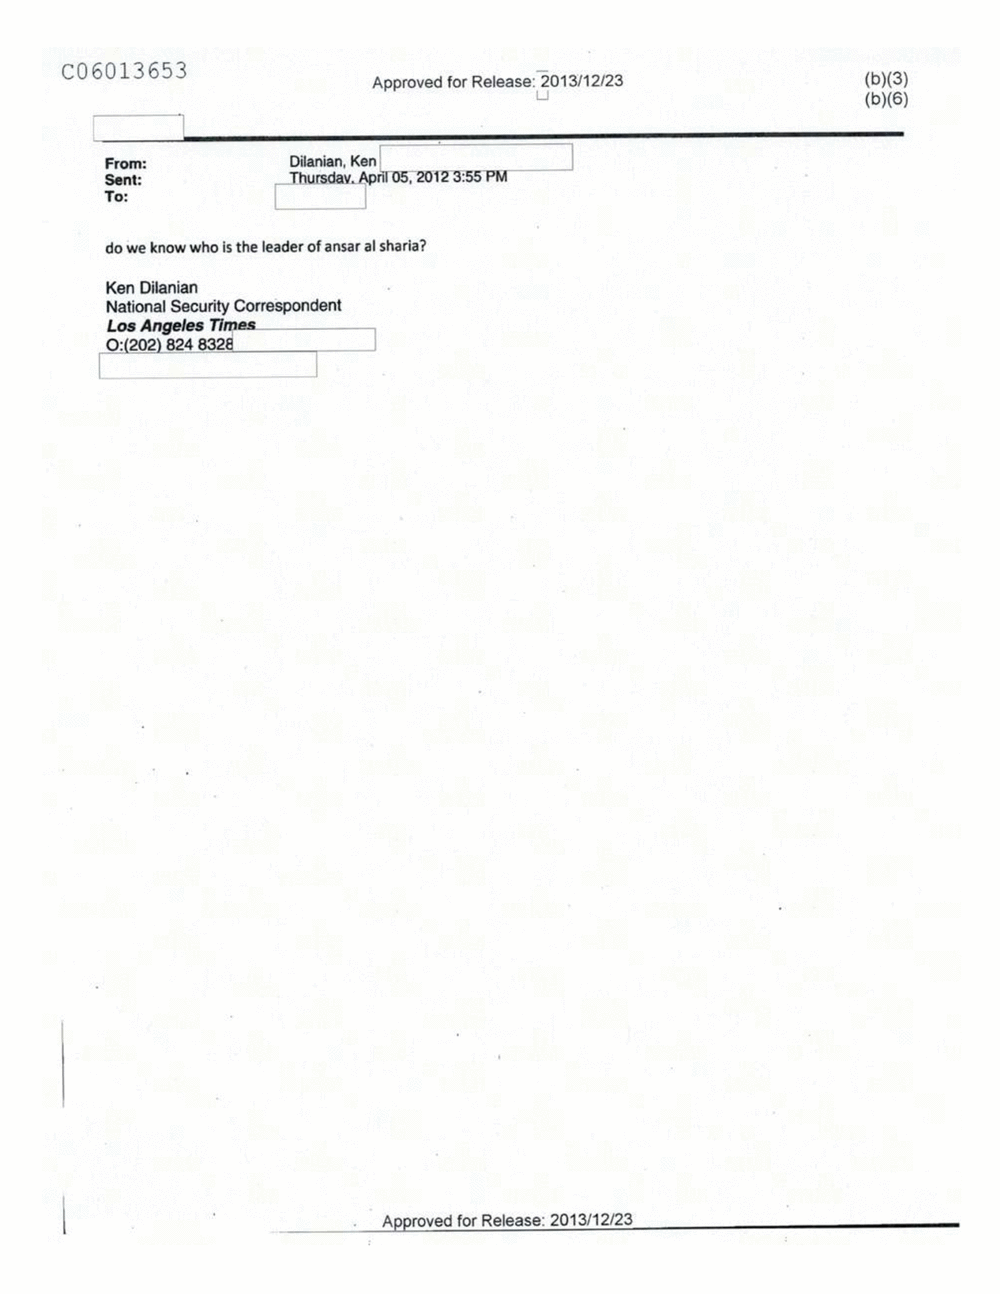 Page 504 from Email Correspondence Between Reporters and CIA Flacks